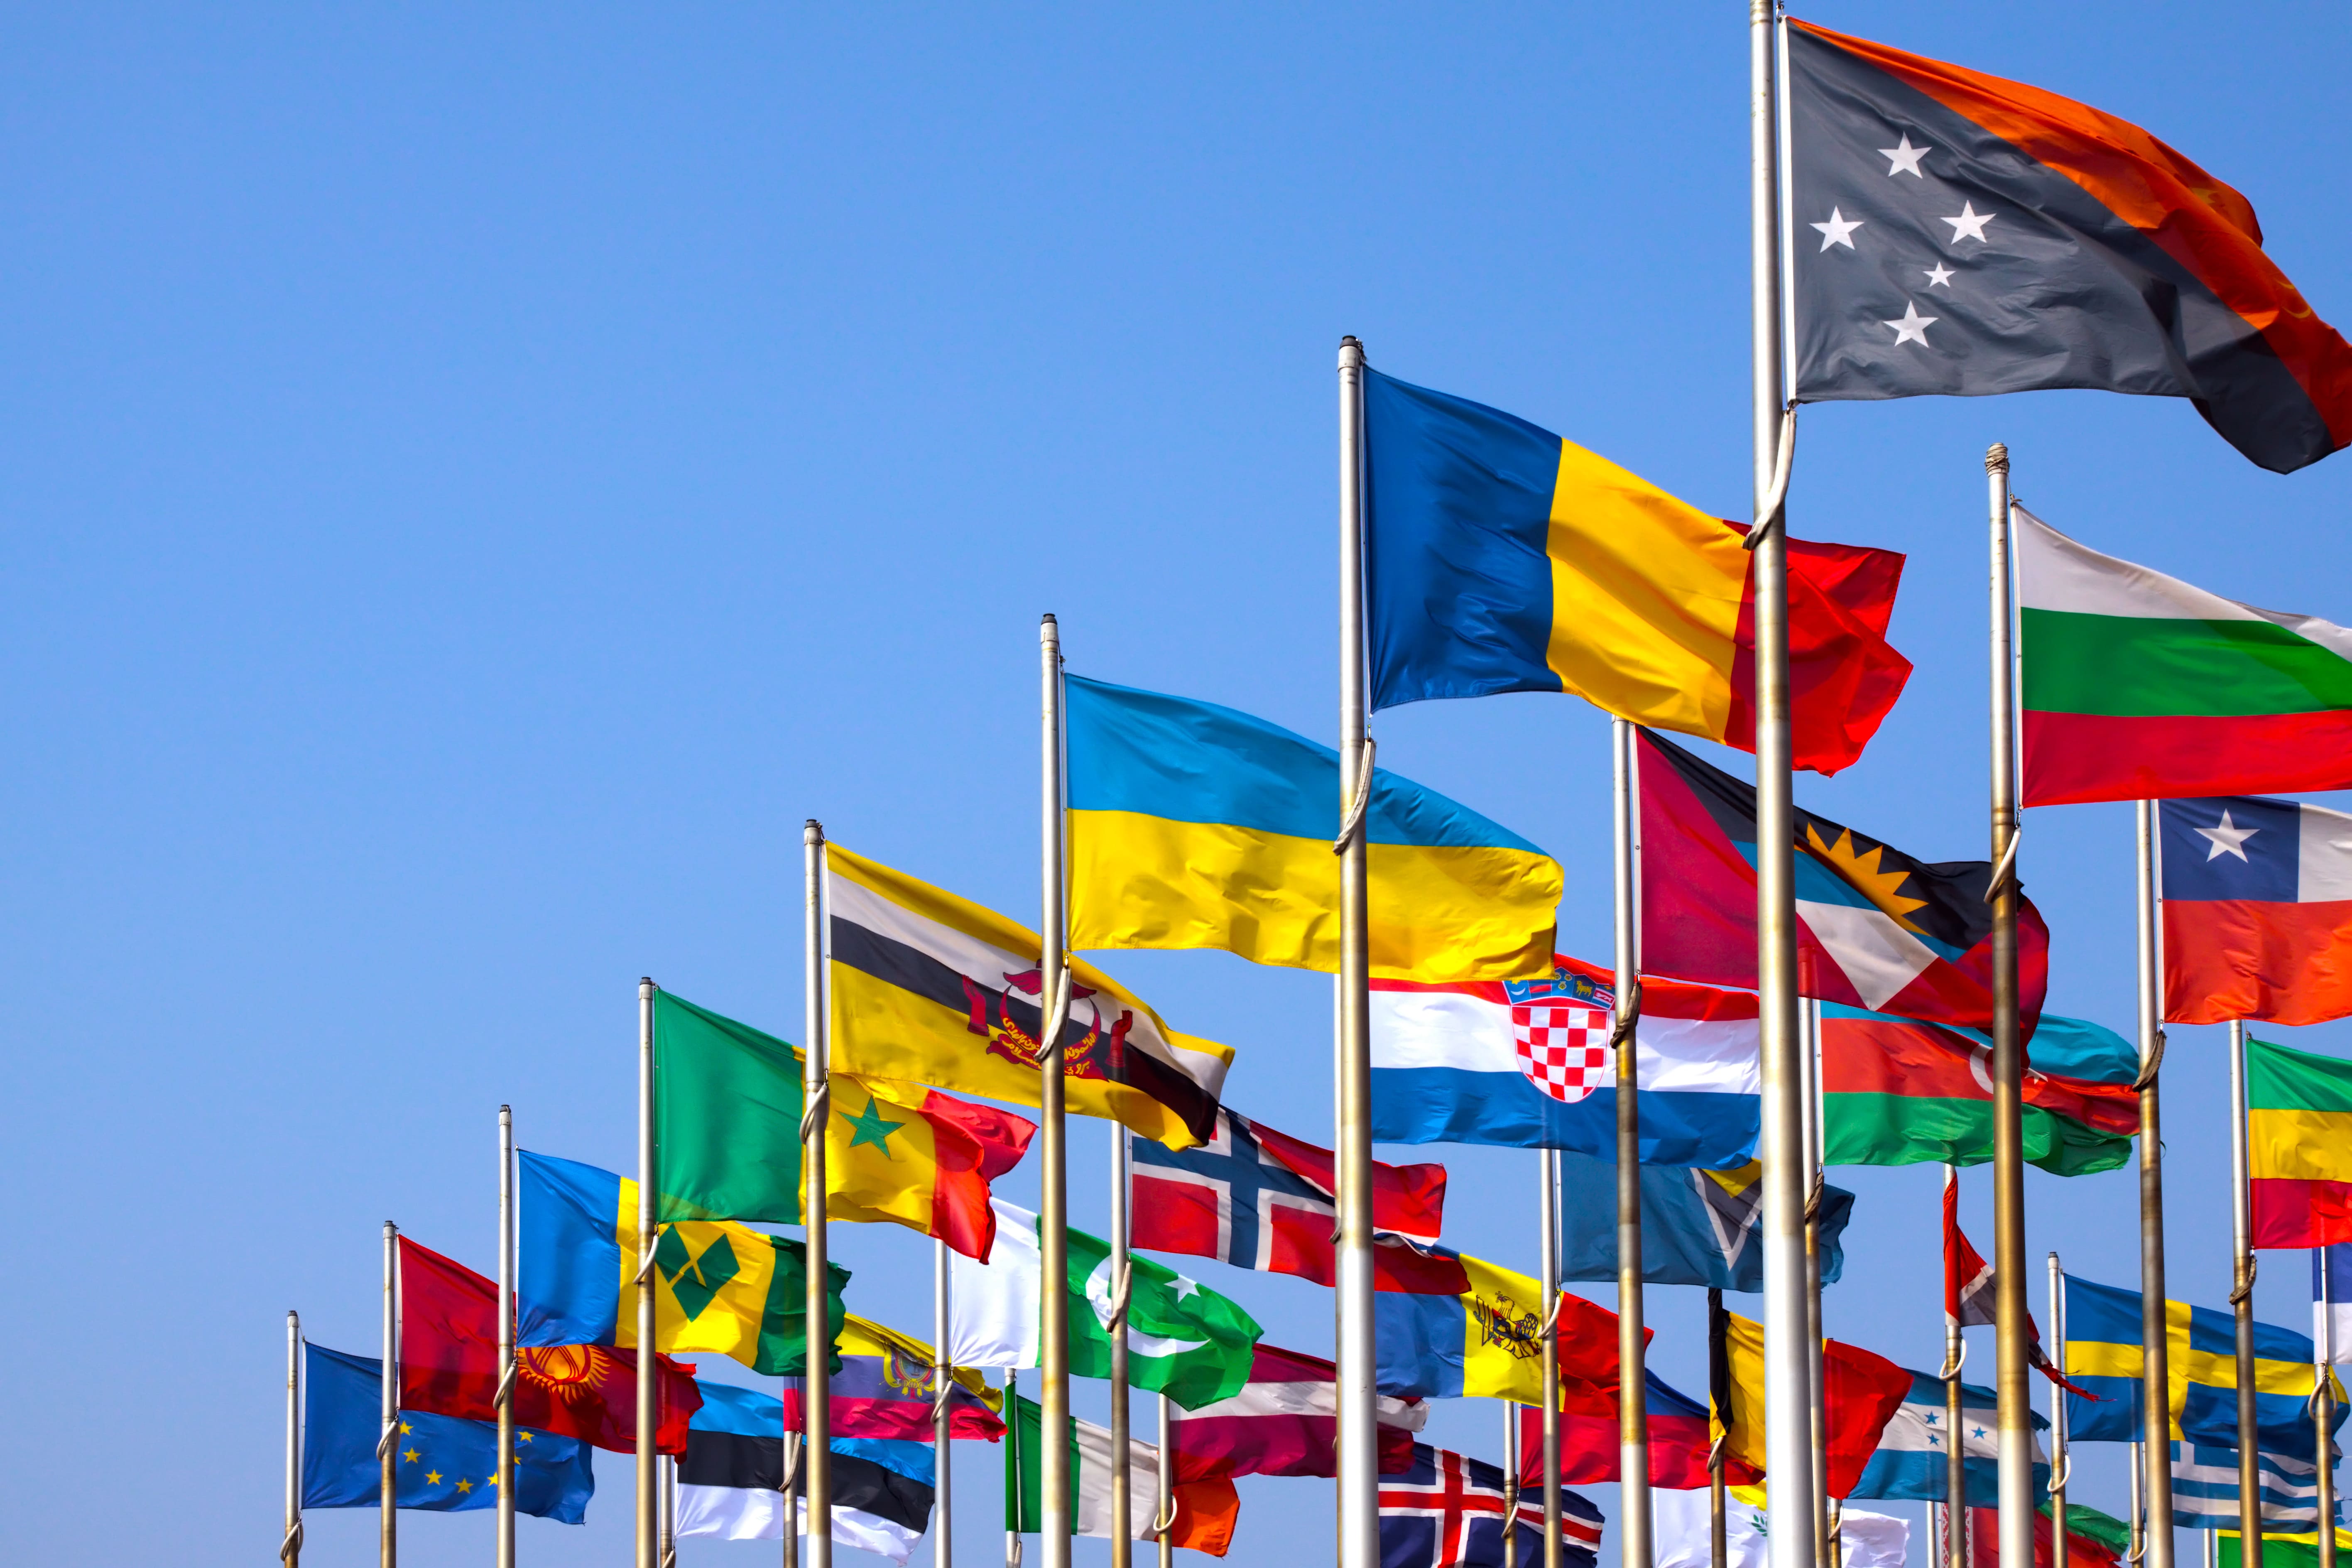 world flags flying in the wind in a clear blue sky